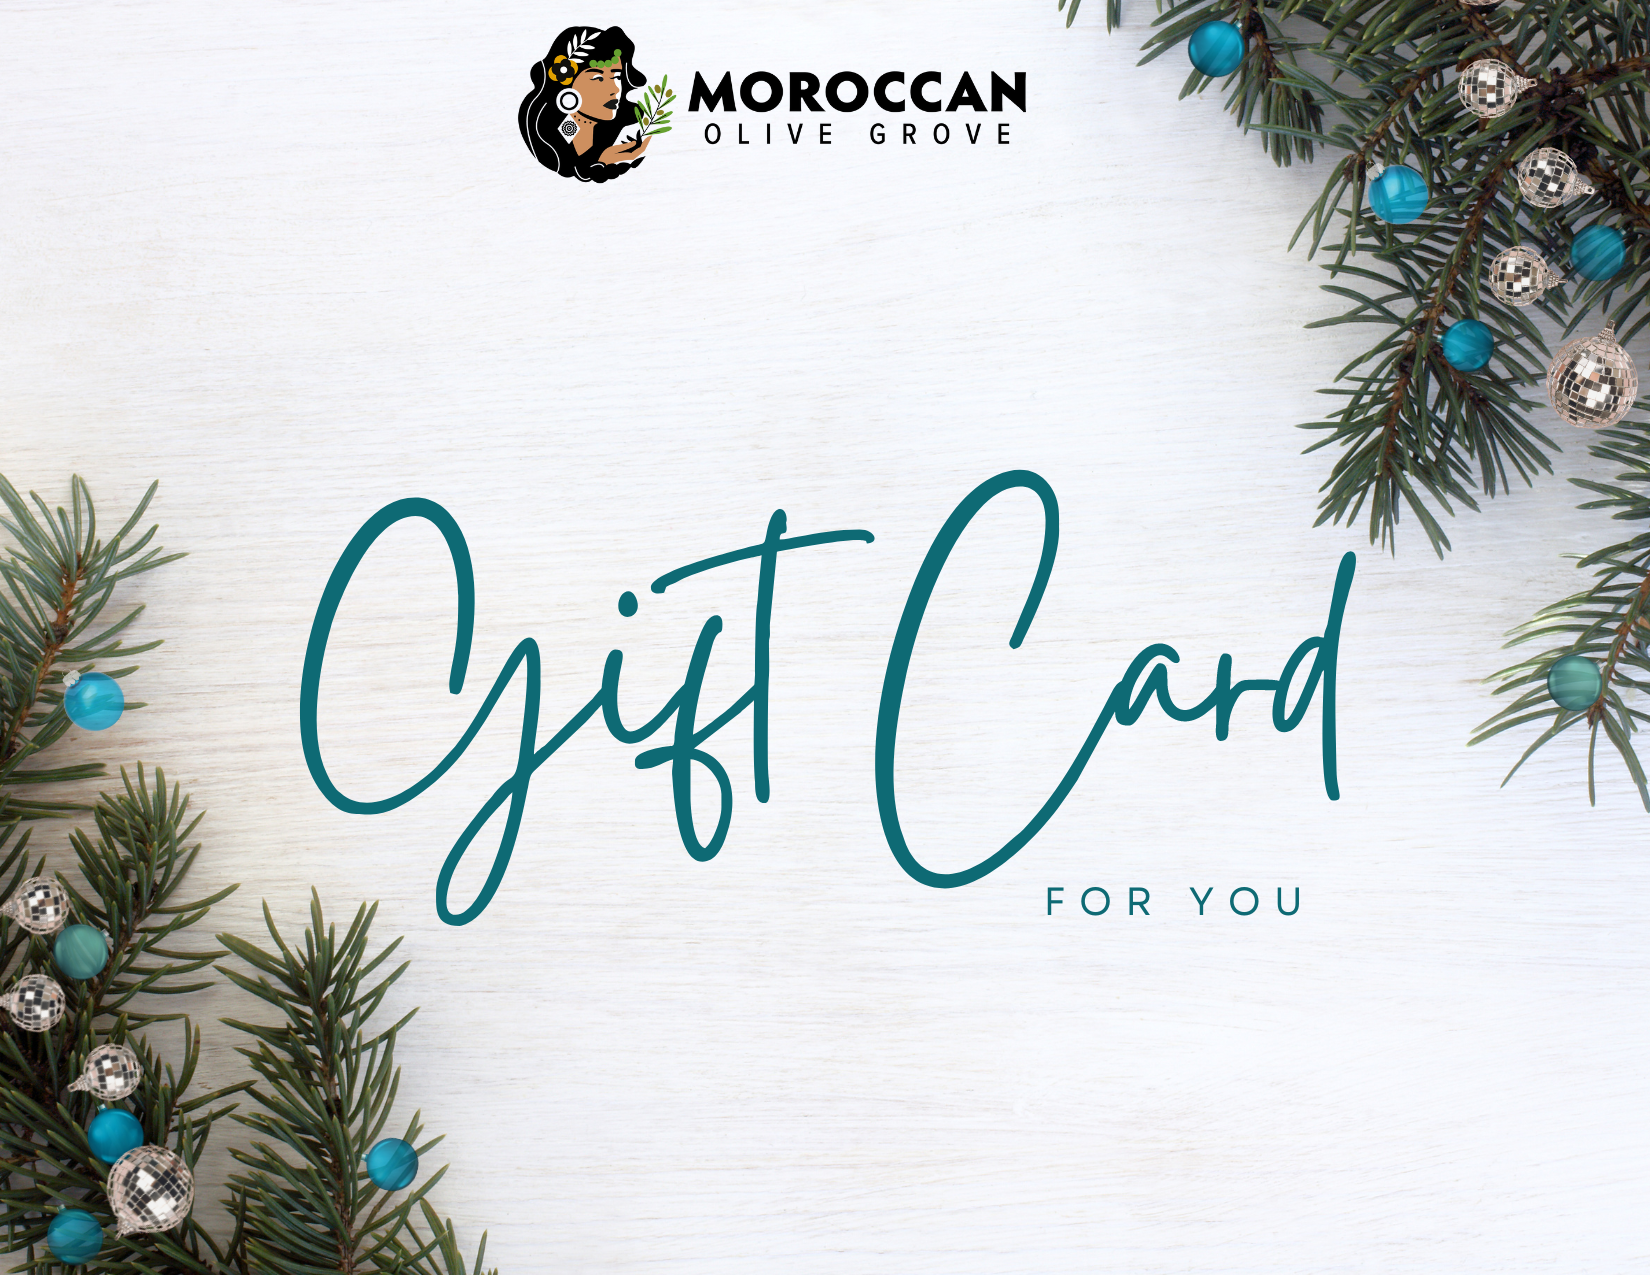 Moroccan Olive Grove Gift Card